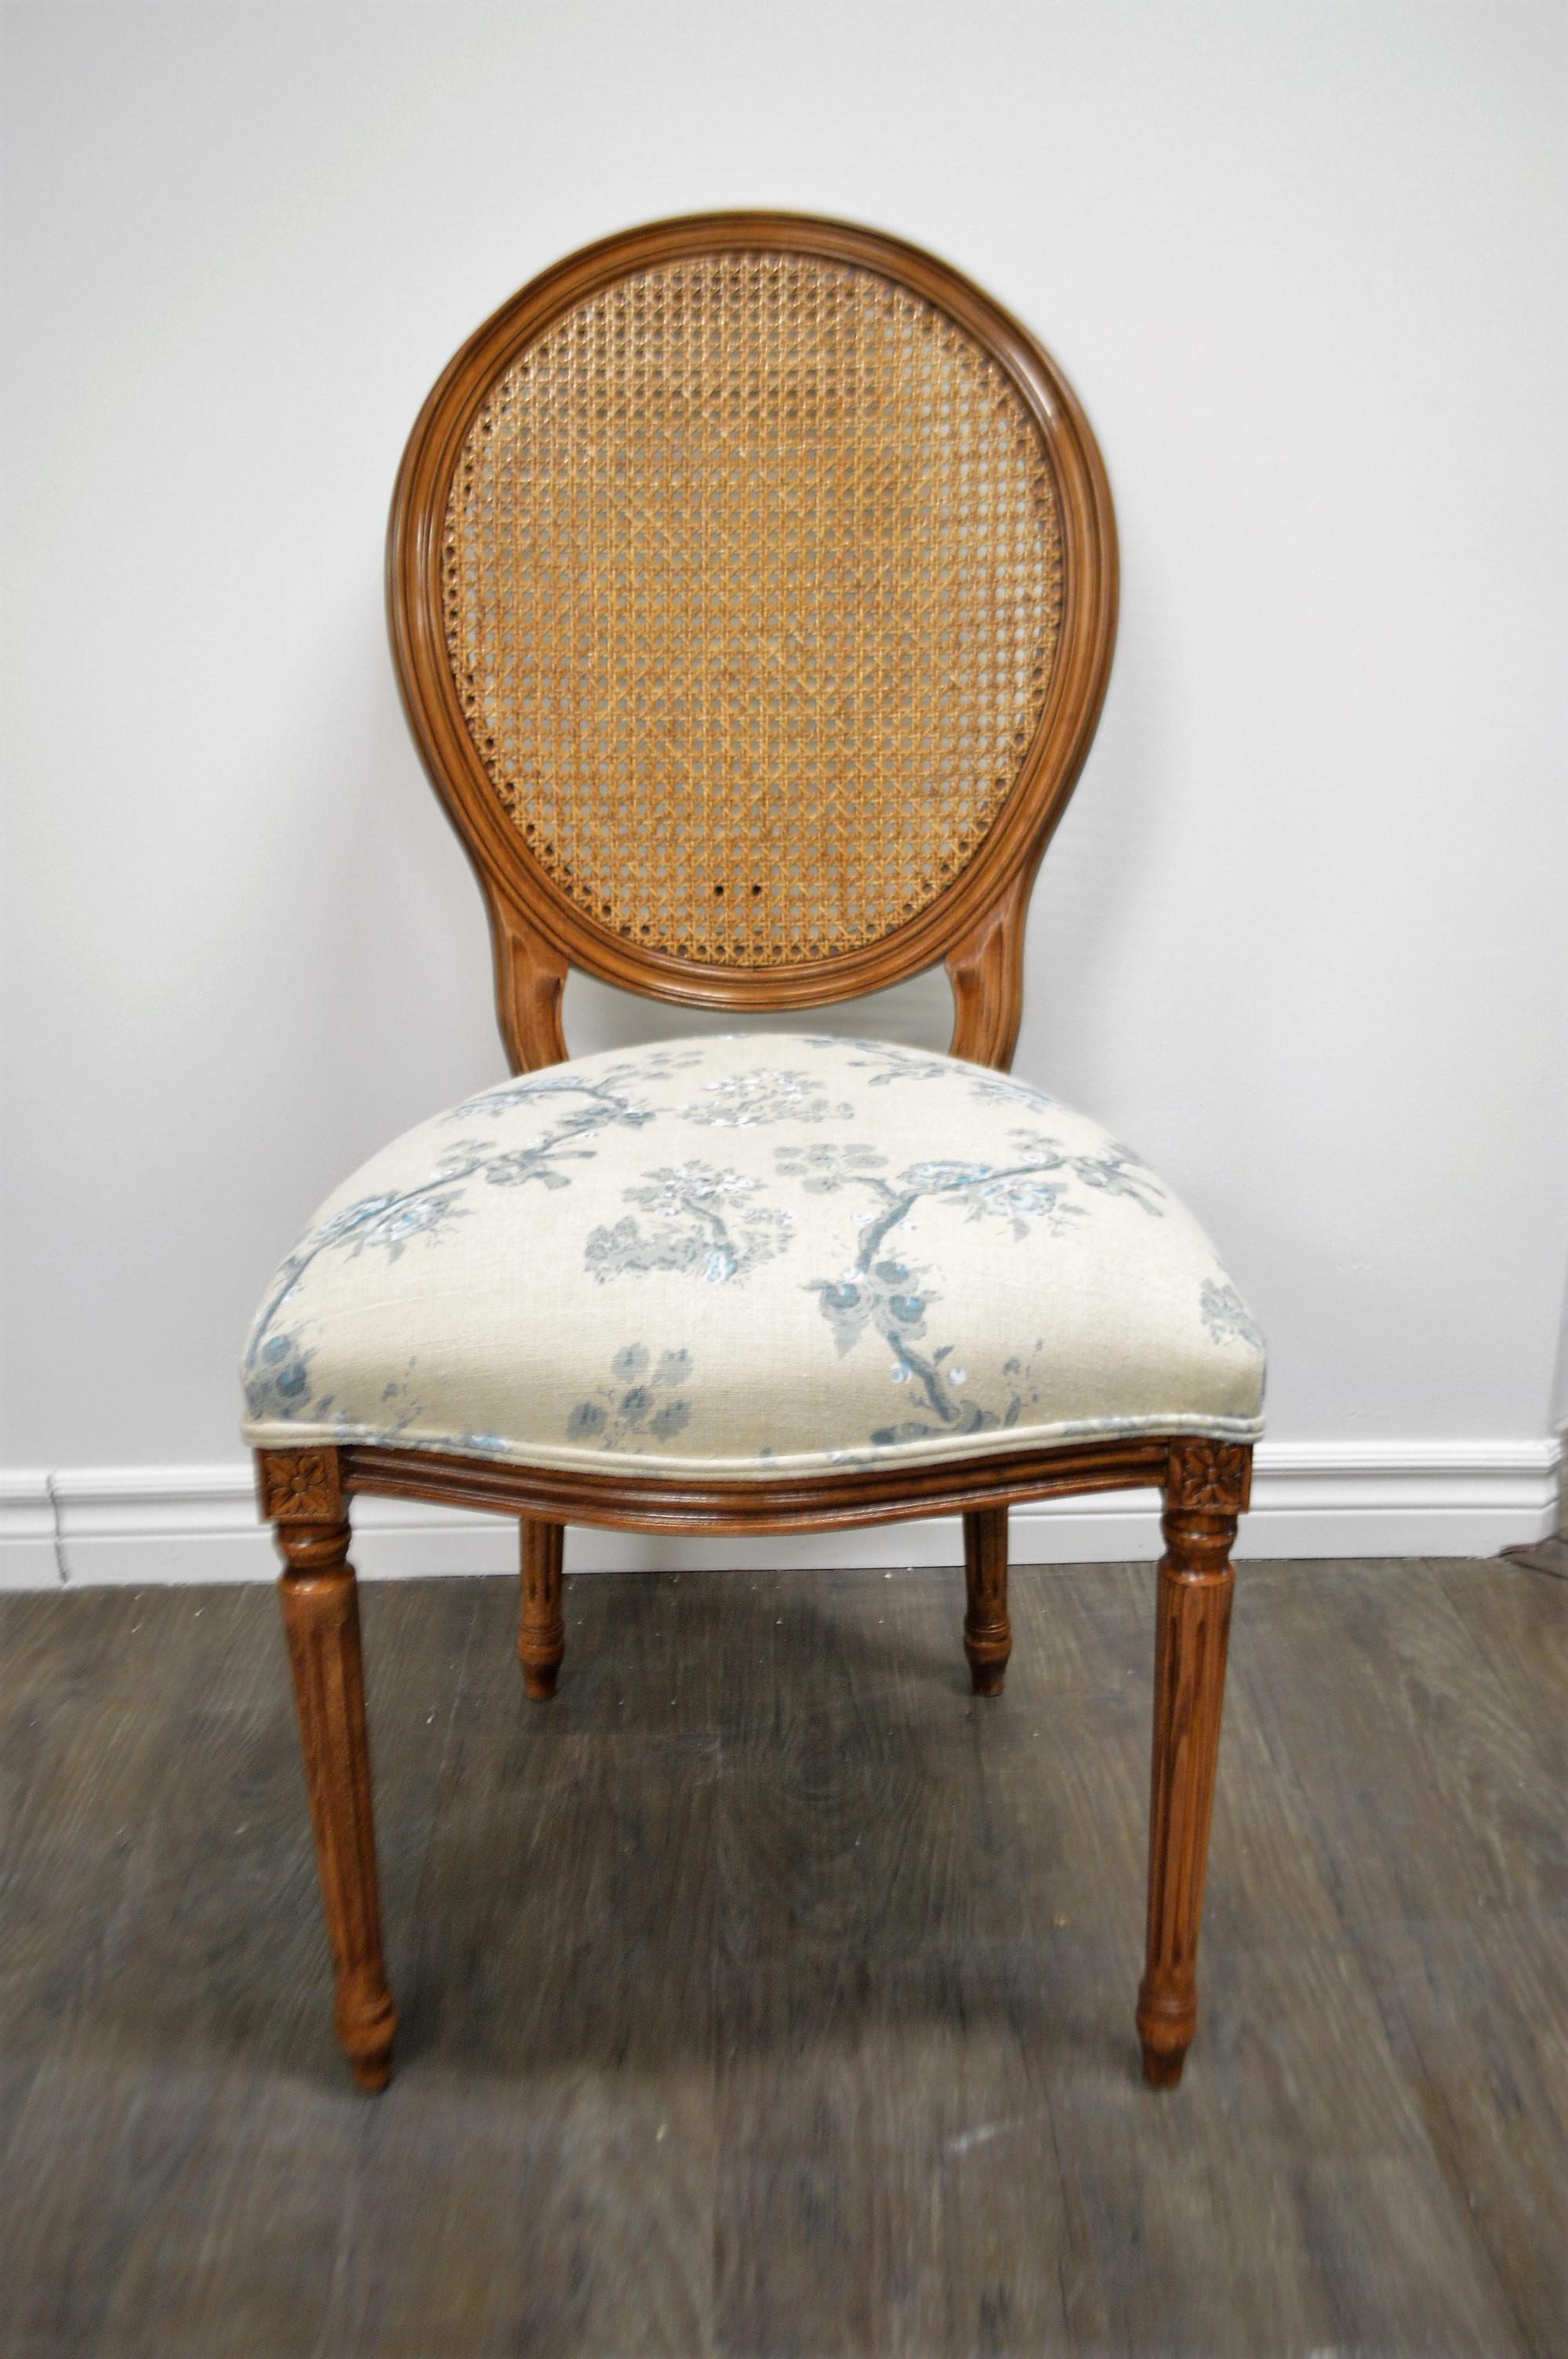 Set of 6 Louis XVI style oval back dining chairs. The chairs are made of beech wood in Italy, walnut stained.
The fabric is a silk screen print on beige linen, in tones of light and darker blue with some white.
More chairs of that style are